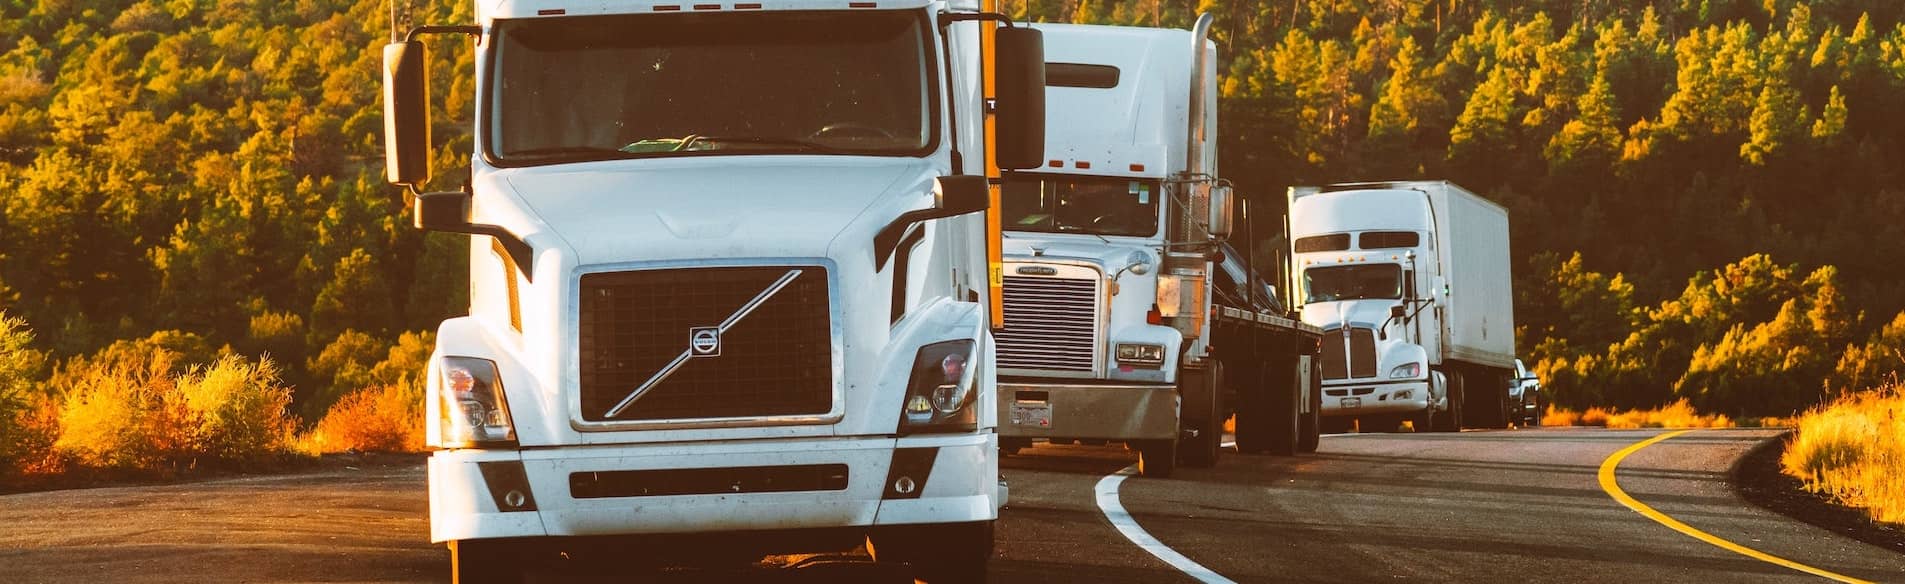 Optimize Route Planning for truckers